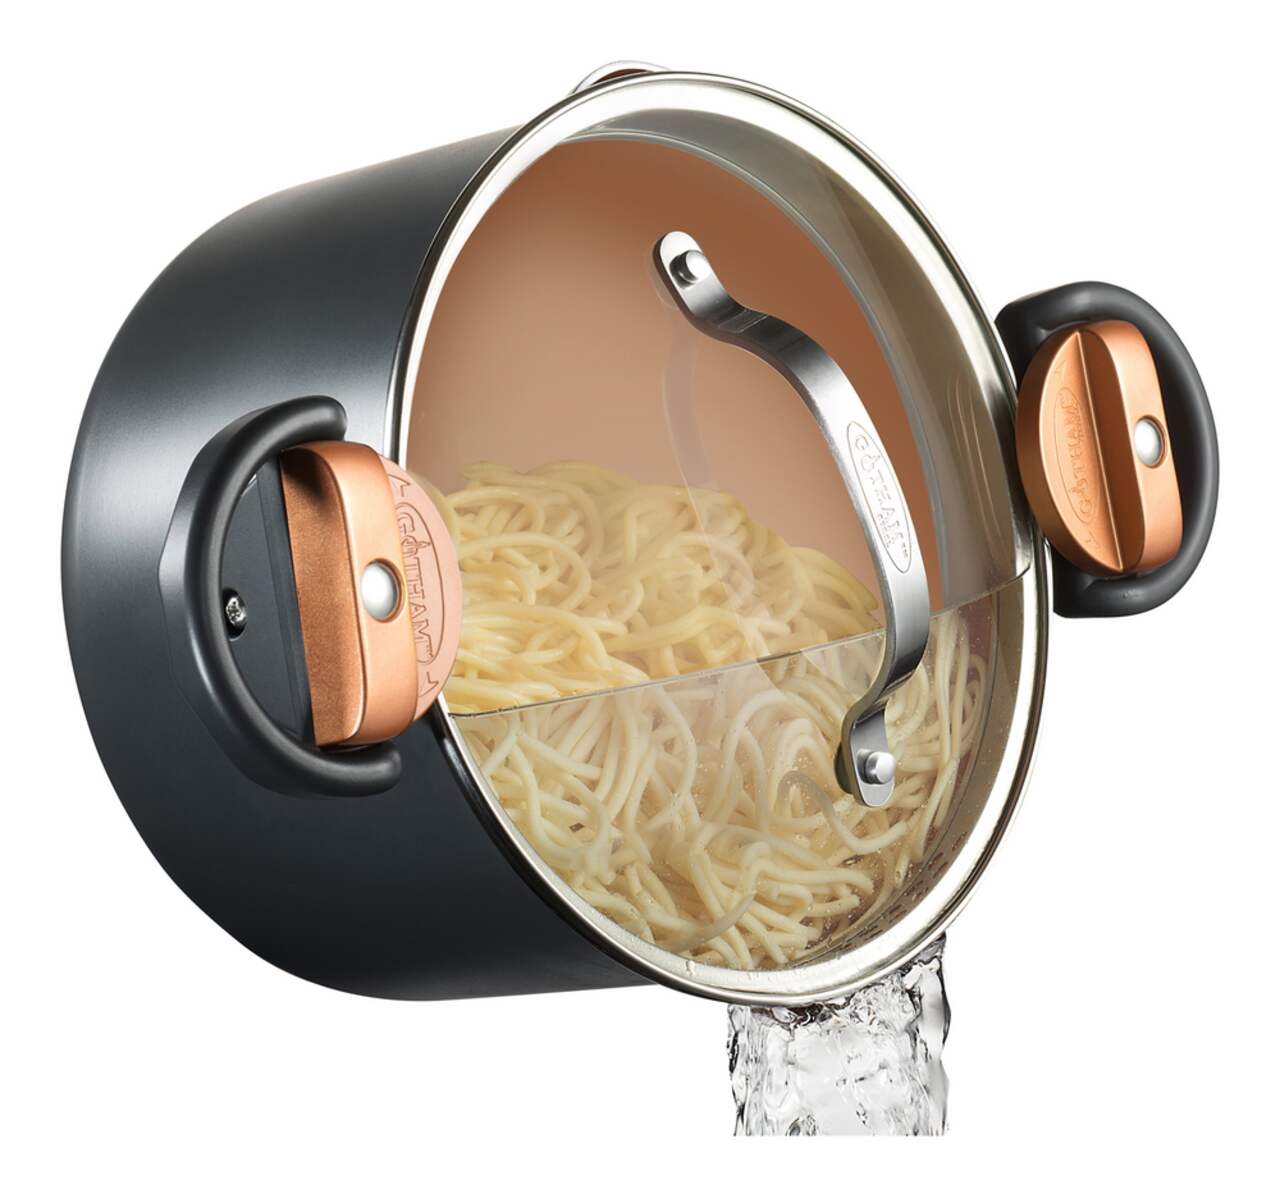 https://media-www.canadiantire.ca/product/living/as-seen-on-tv/asotv/2996374/asotv-gotham-steel-pasta-pot-42cccfa9-9529-413a-81bd-b2b409a5f633.png?imdensity=1&imwidth=640&impolicy=mZoom